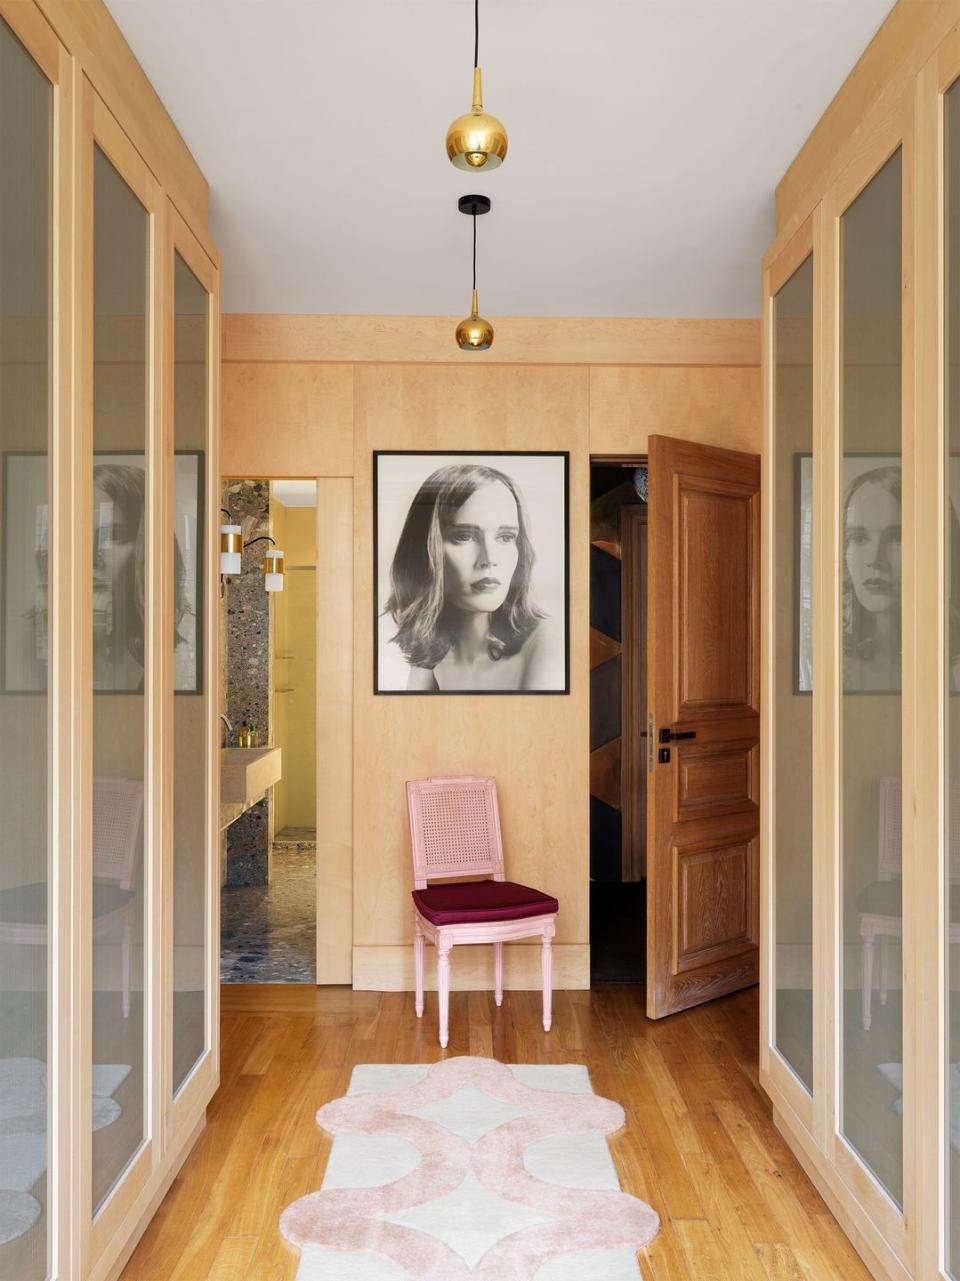 two sides of a walk in closet have three mirrored doors each, wood floors, small brass pendants, a pink chair with burgundy cushion, a closeup photo portrait of a young woman, and a carved wooden entry door